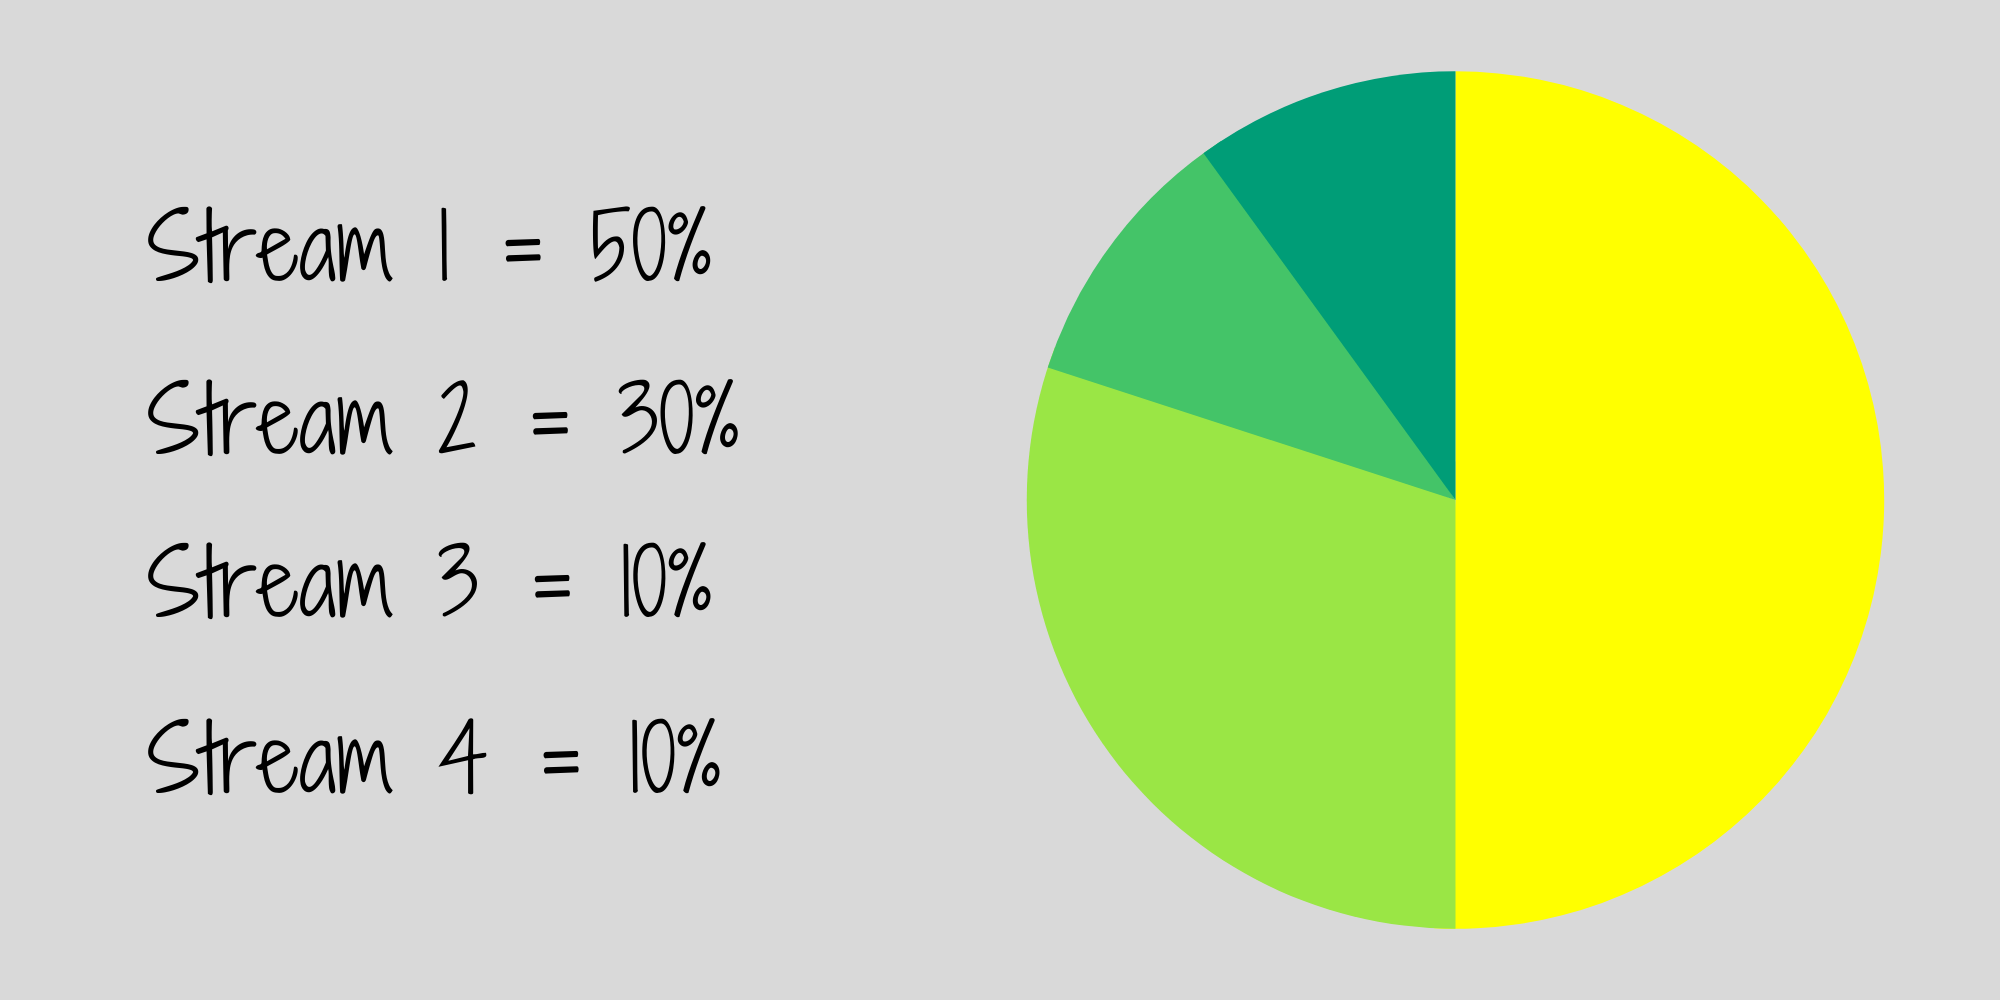 Pie chart showing stream 1 at 50%, stream 2 at 30%, stream 3 and 4 at 10%